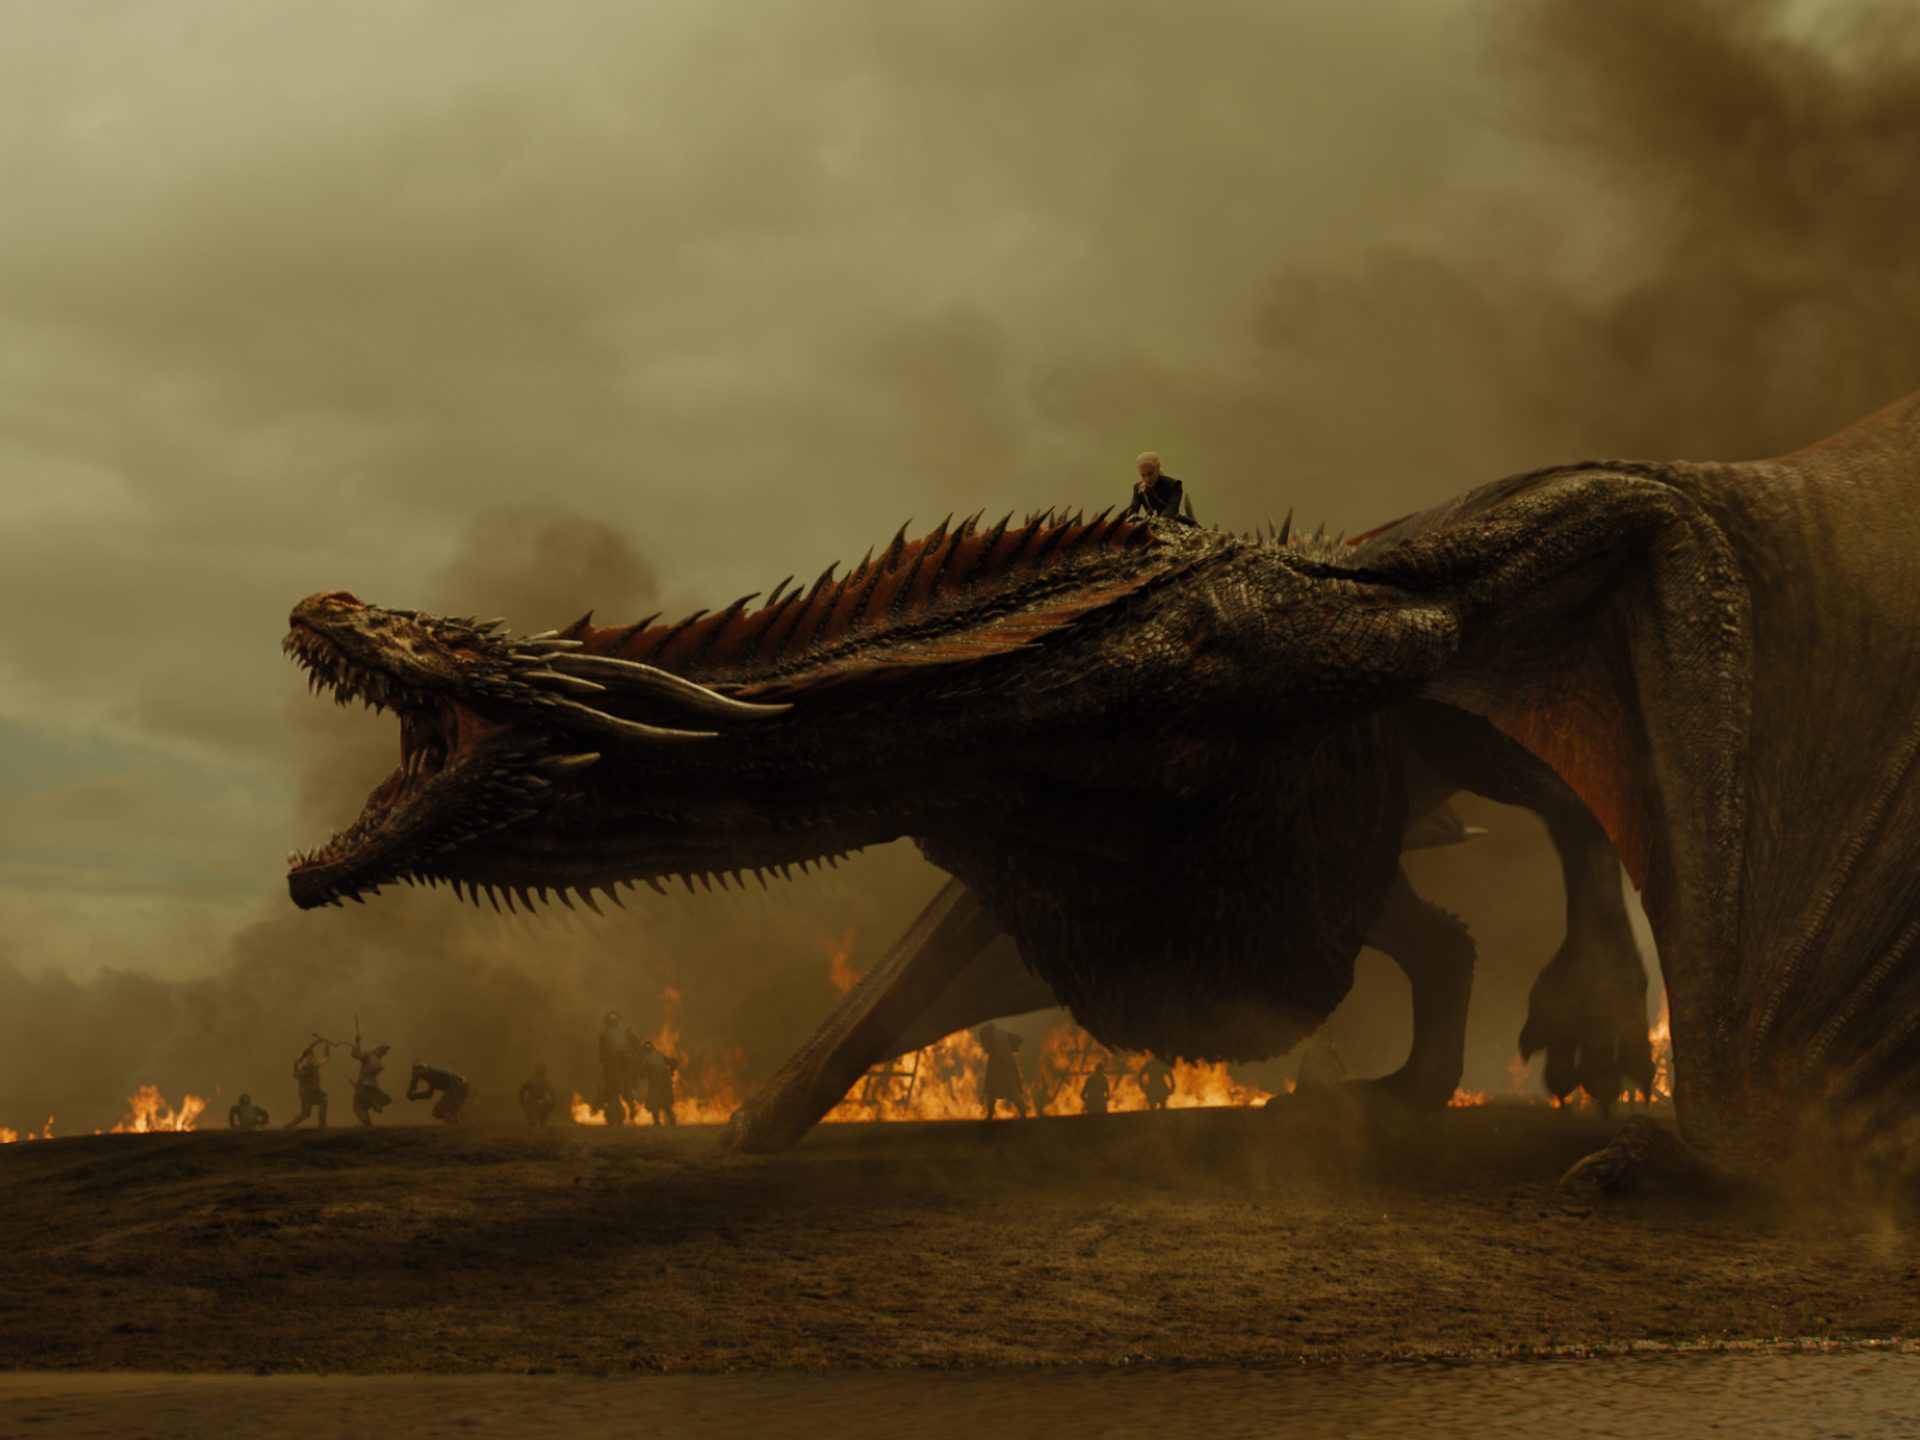 WATCH: Behind the scenes of the epic ‘Game of Thrones’ ‘loot train attack’